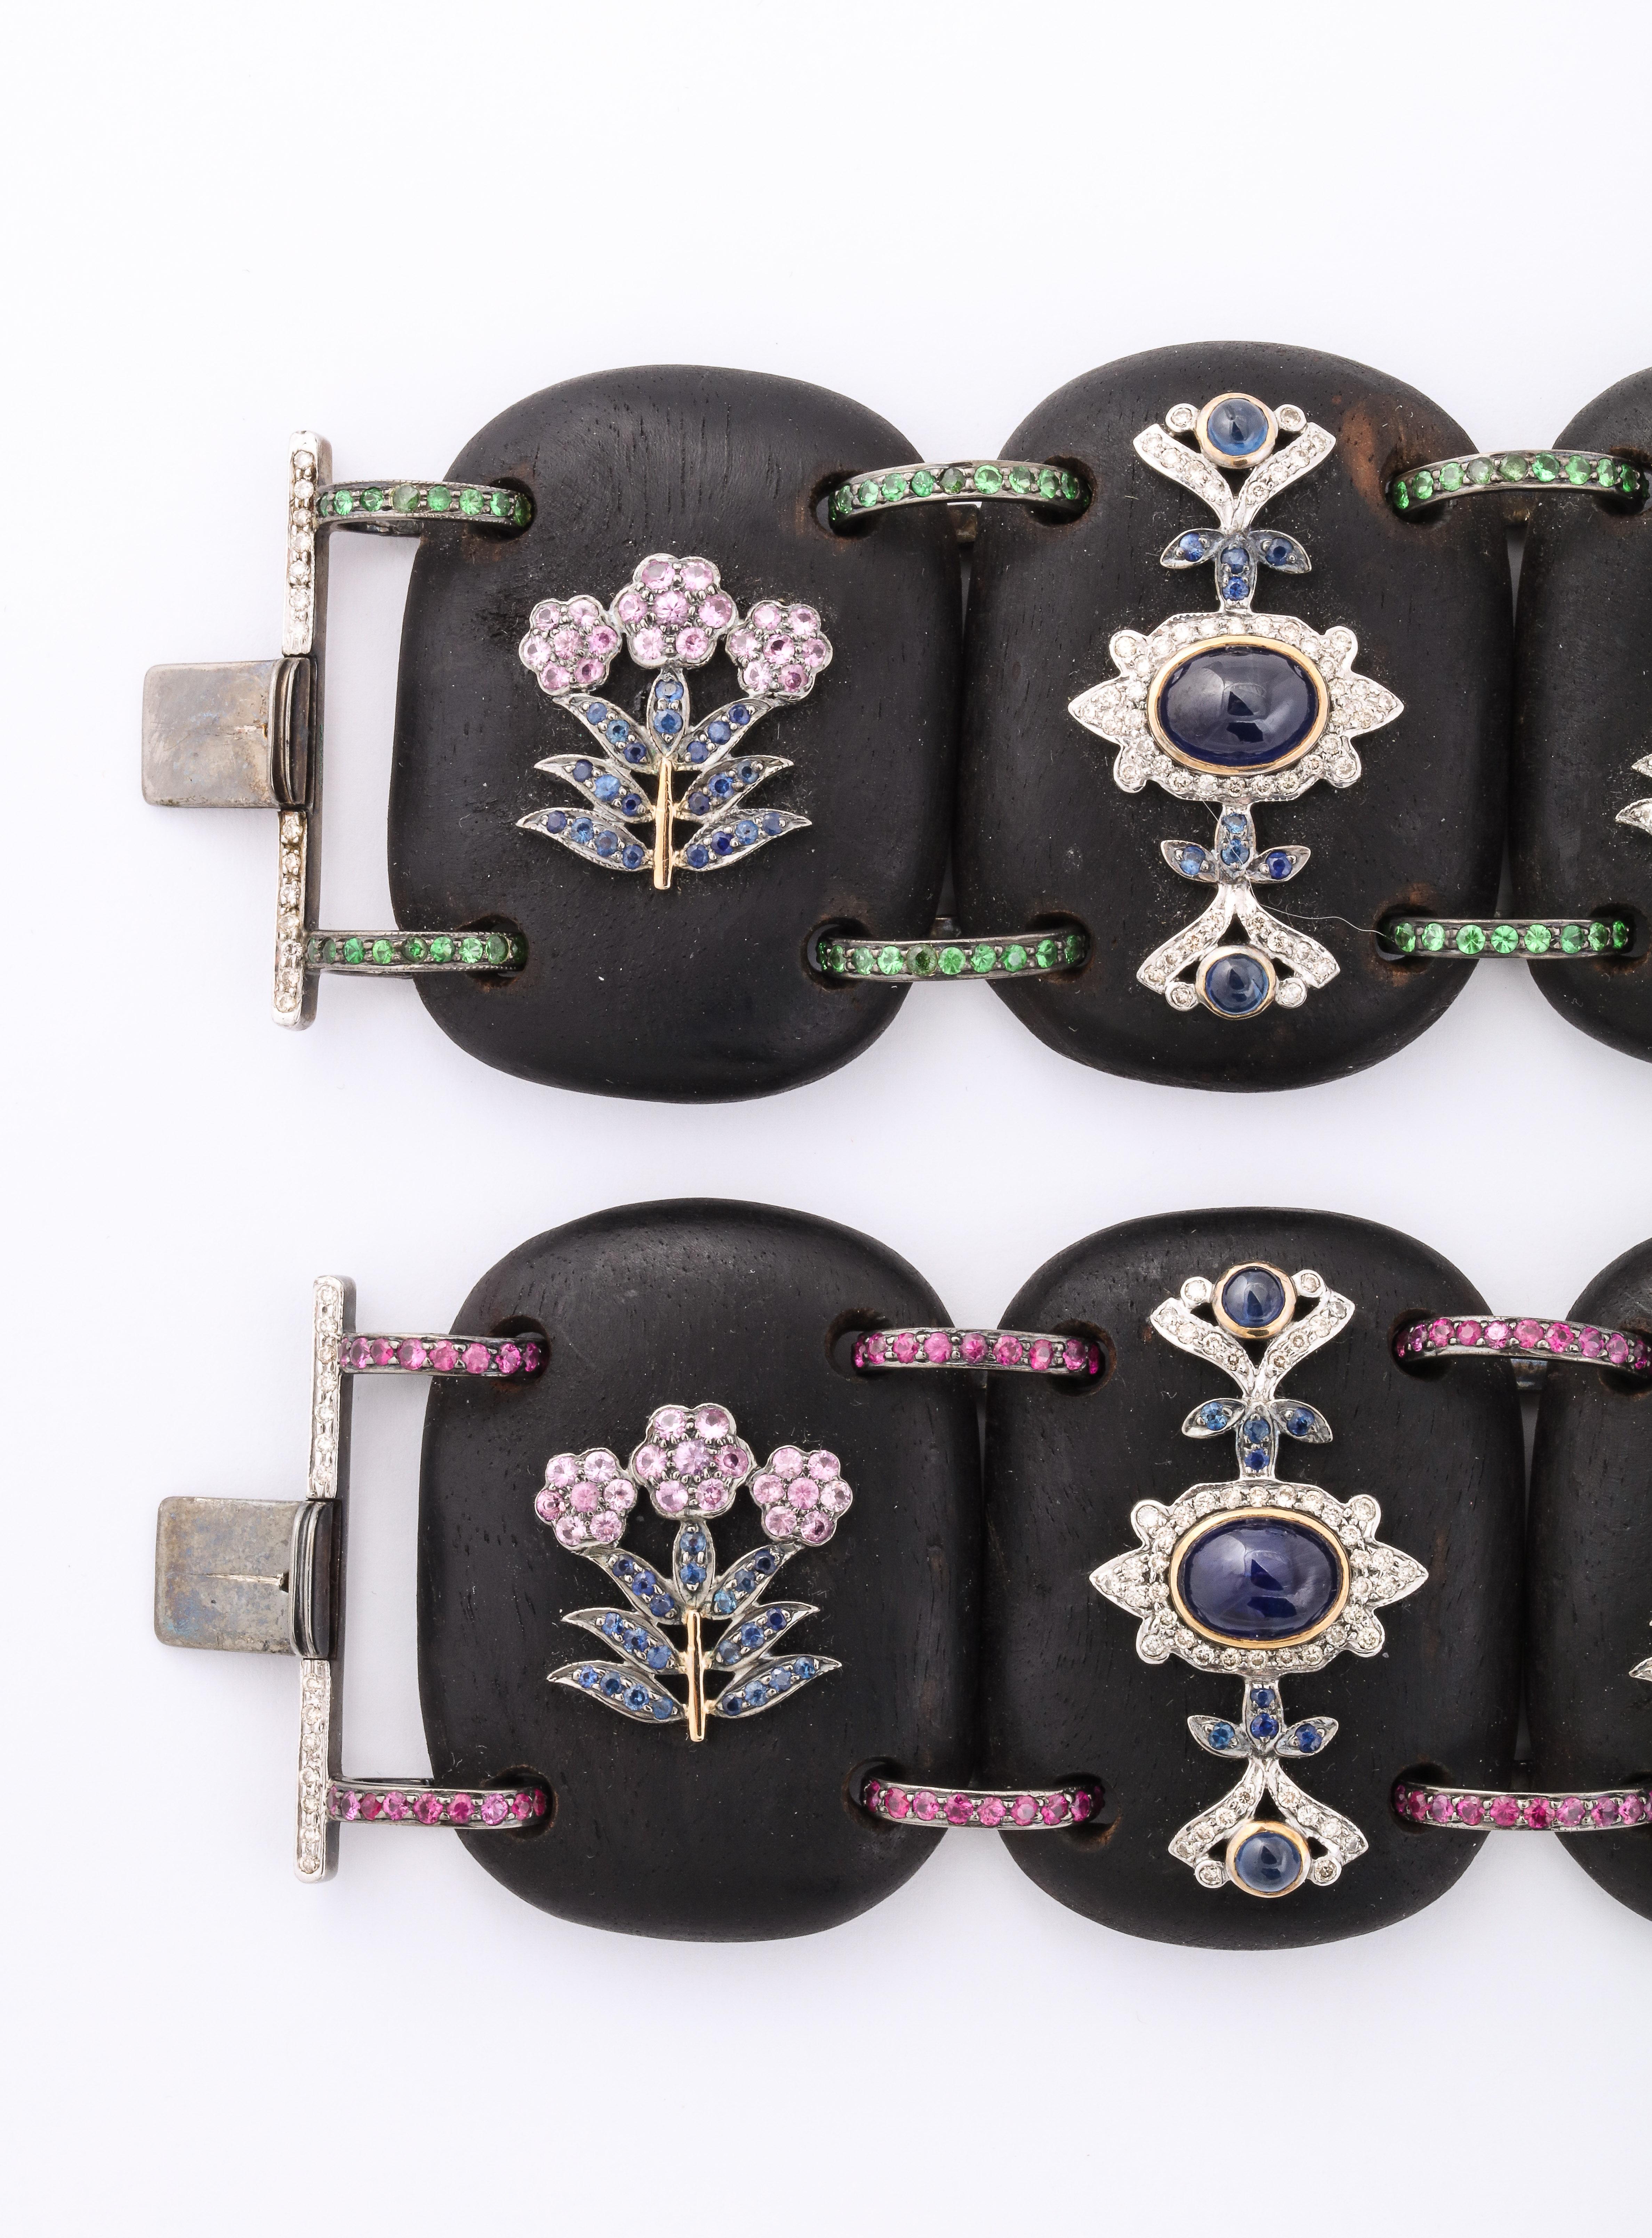 Pair of ebony, diamond, sapphire, ruby, tourmaline, emerald and citrine bracelets.  Oxidized silver, 146 grams, with 310 single cut diamonds at 1.5 carats. 7 1/2 inches long by 1 5/8 inches wide x 1/4 inch high.

Materials:
Oxidized silver, 146